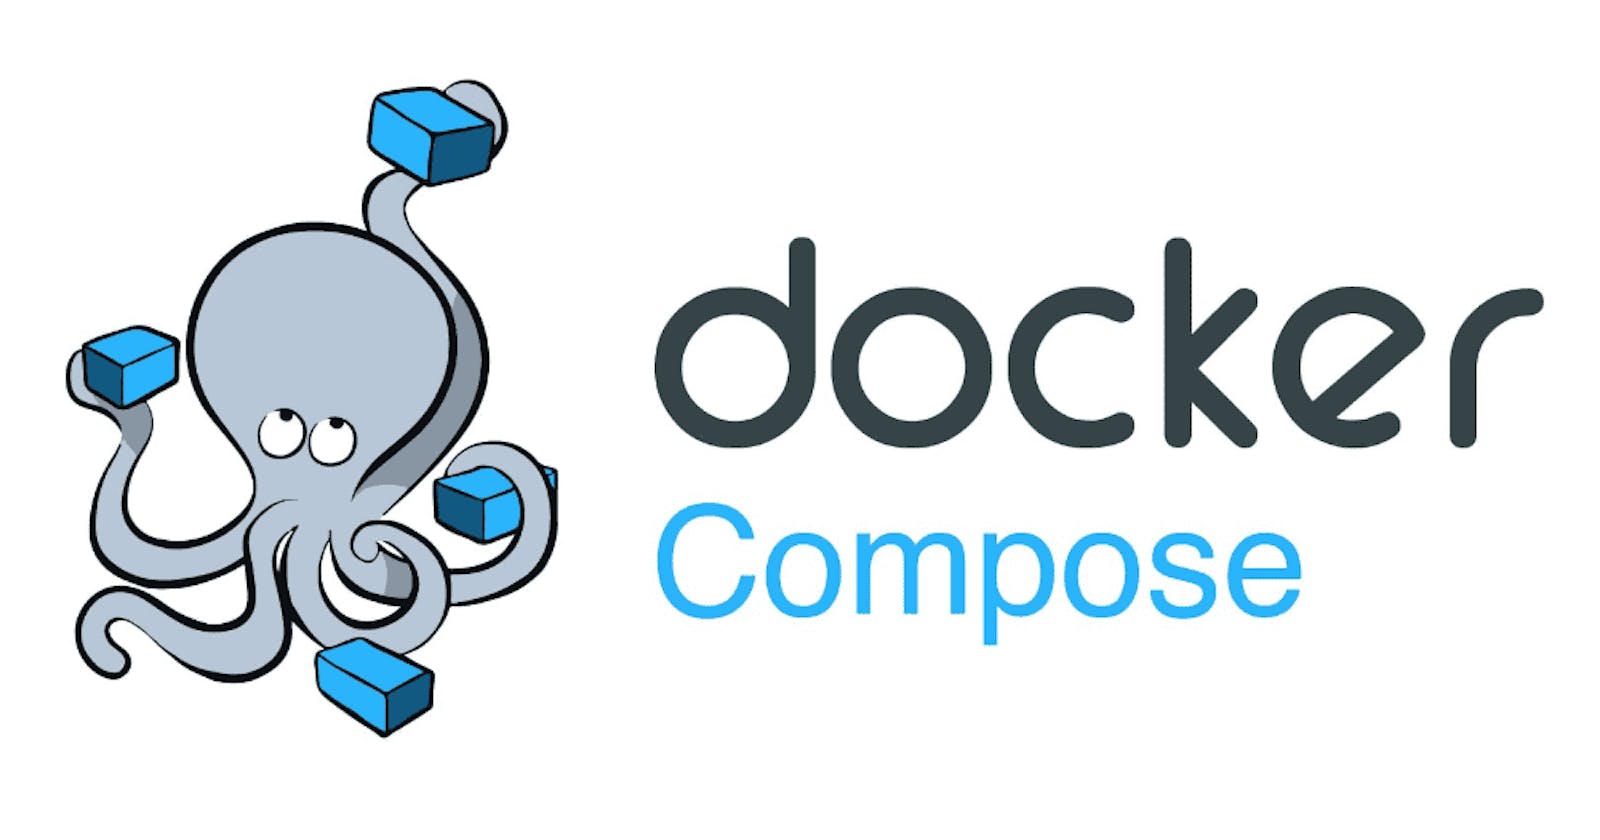 Introduction to Docker Compose